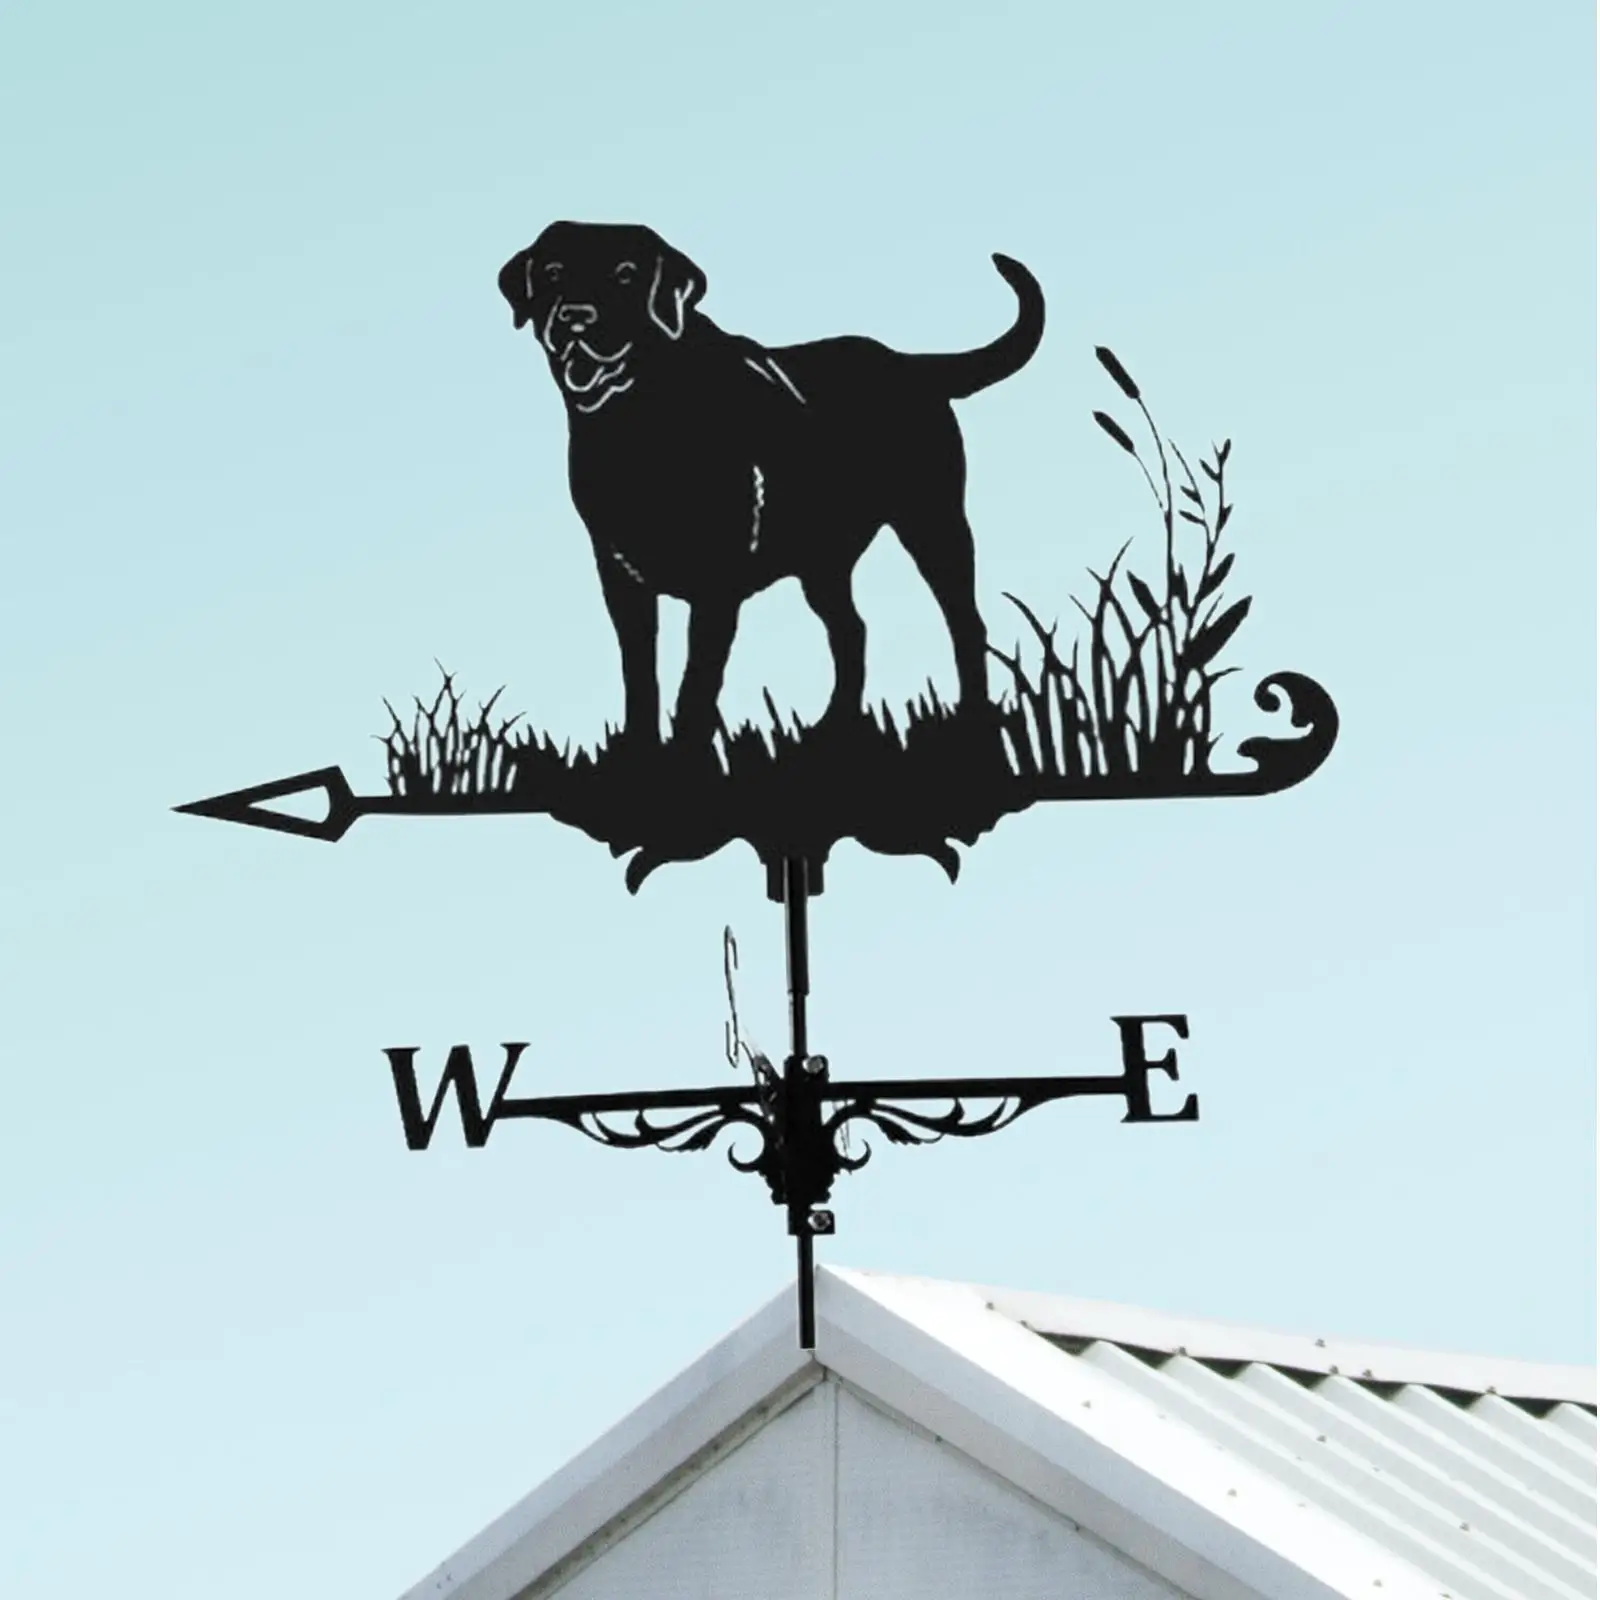 29.5 in.  Vane Ornament  Weather Vain for Roof Weather Vanes for Roofs Weathervane